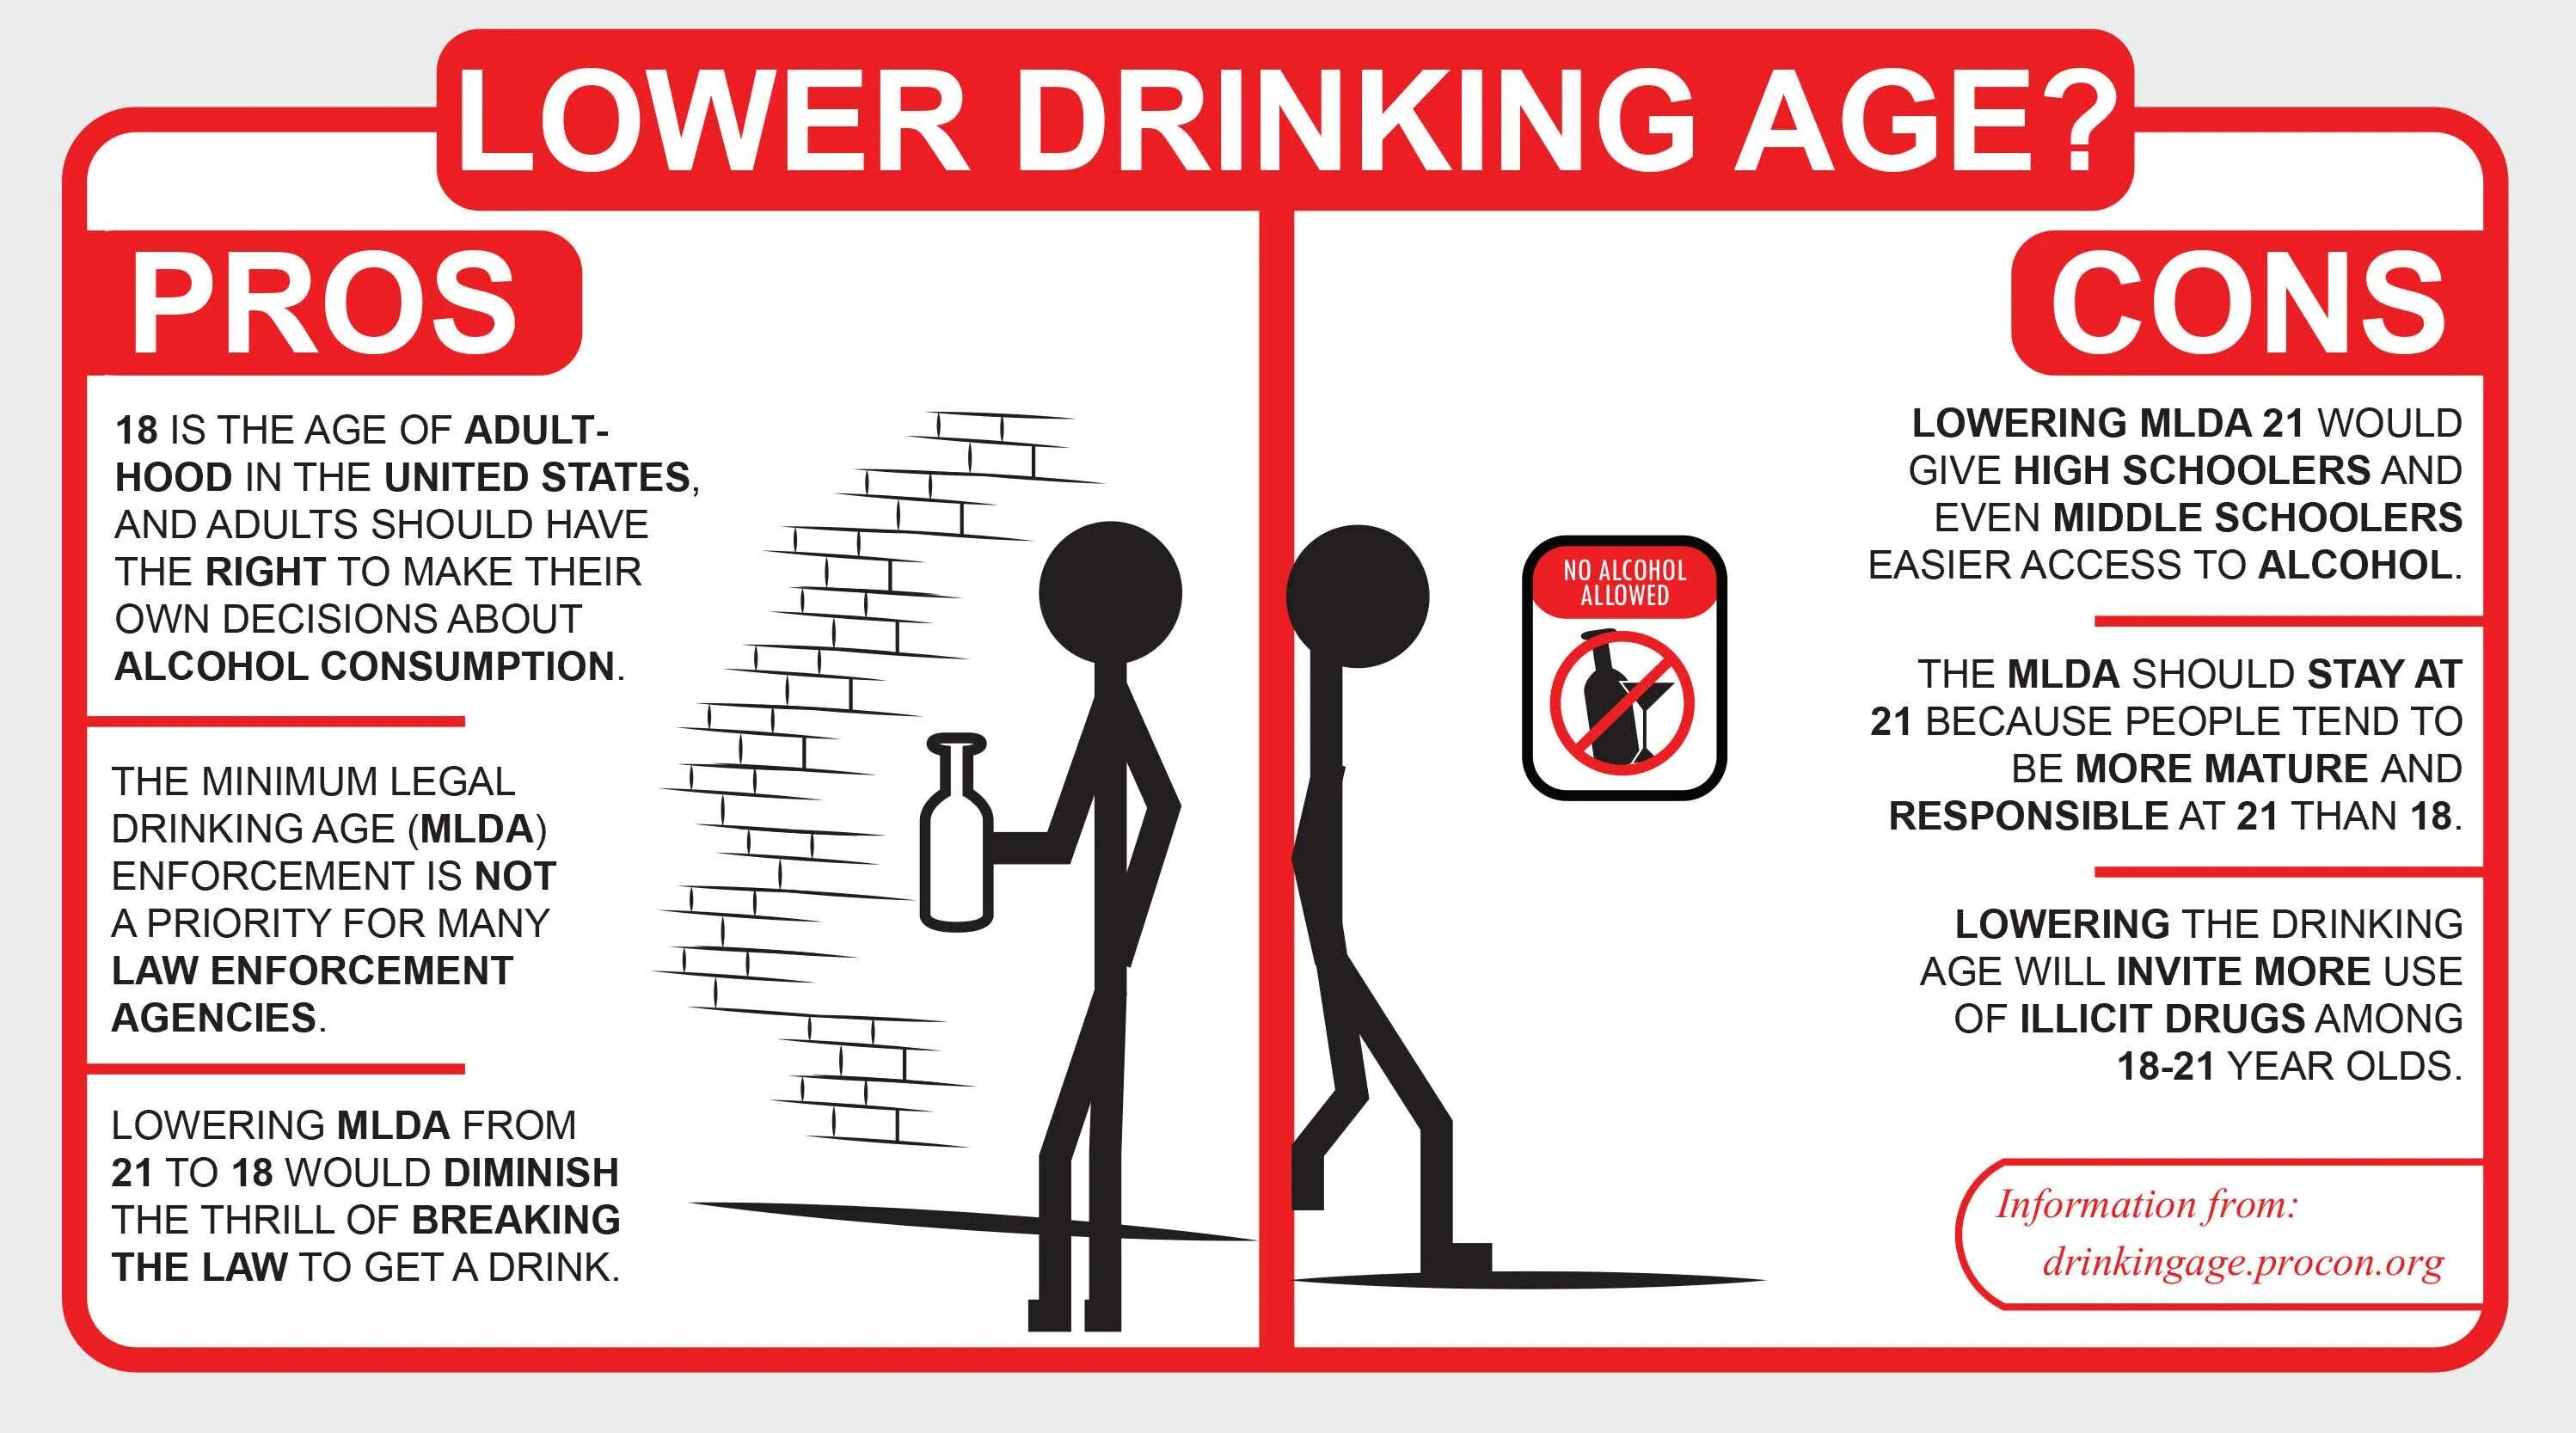 Legal drinking age. Should the drinking age be lowered?. Legal drinking age Canada. Consumerism Pros and cons.